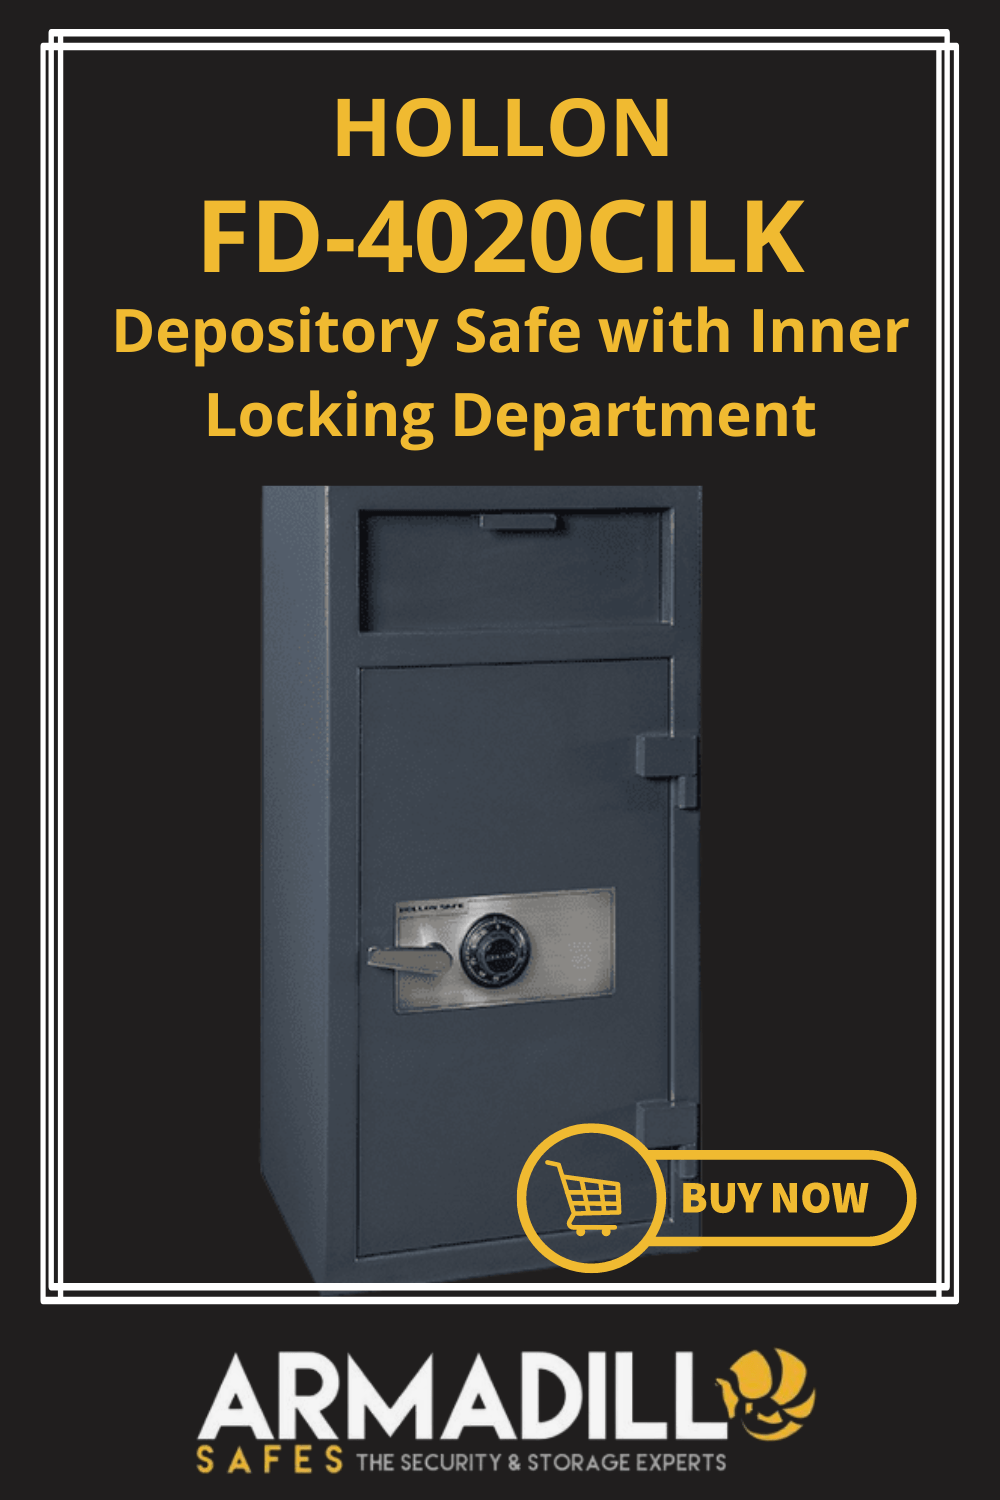 Hollon FD-4020CILK Depository Safe with Inner Locking Department Armadillo Safe and Vault